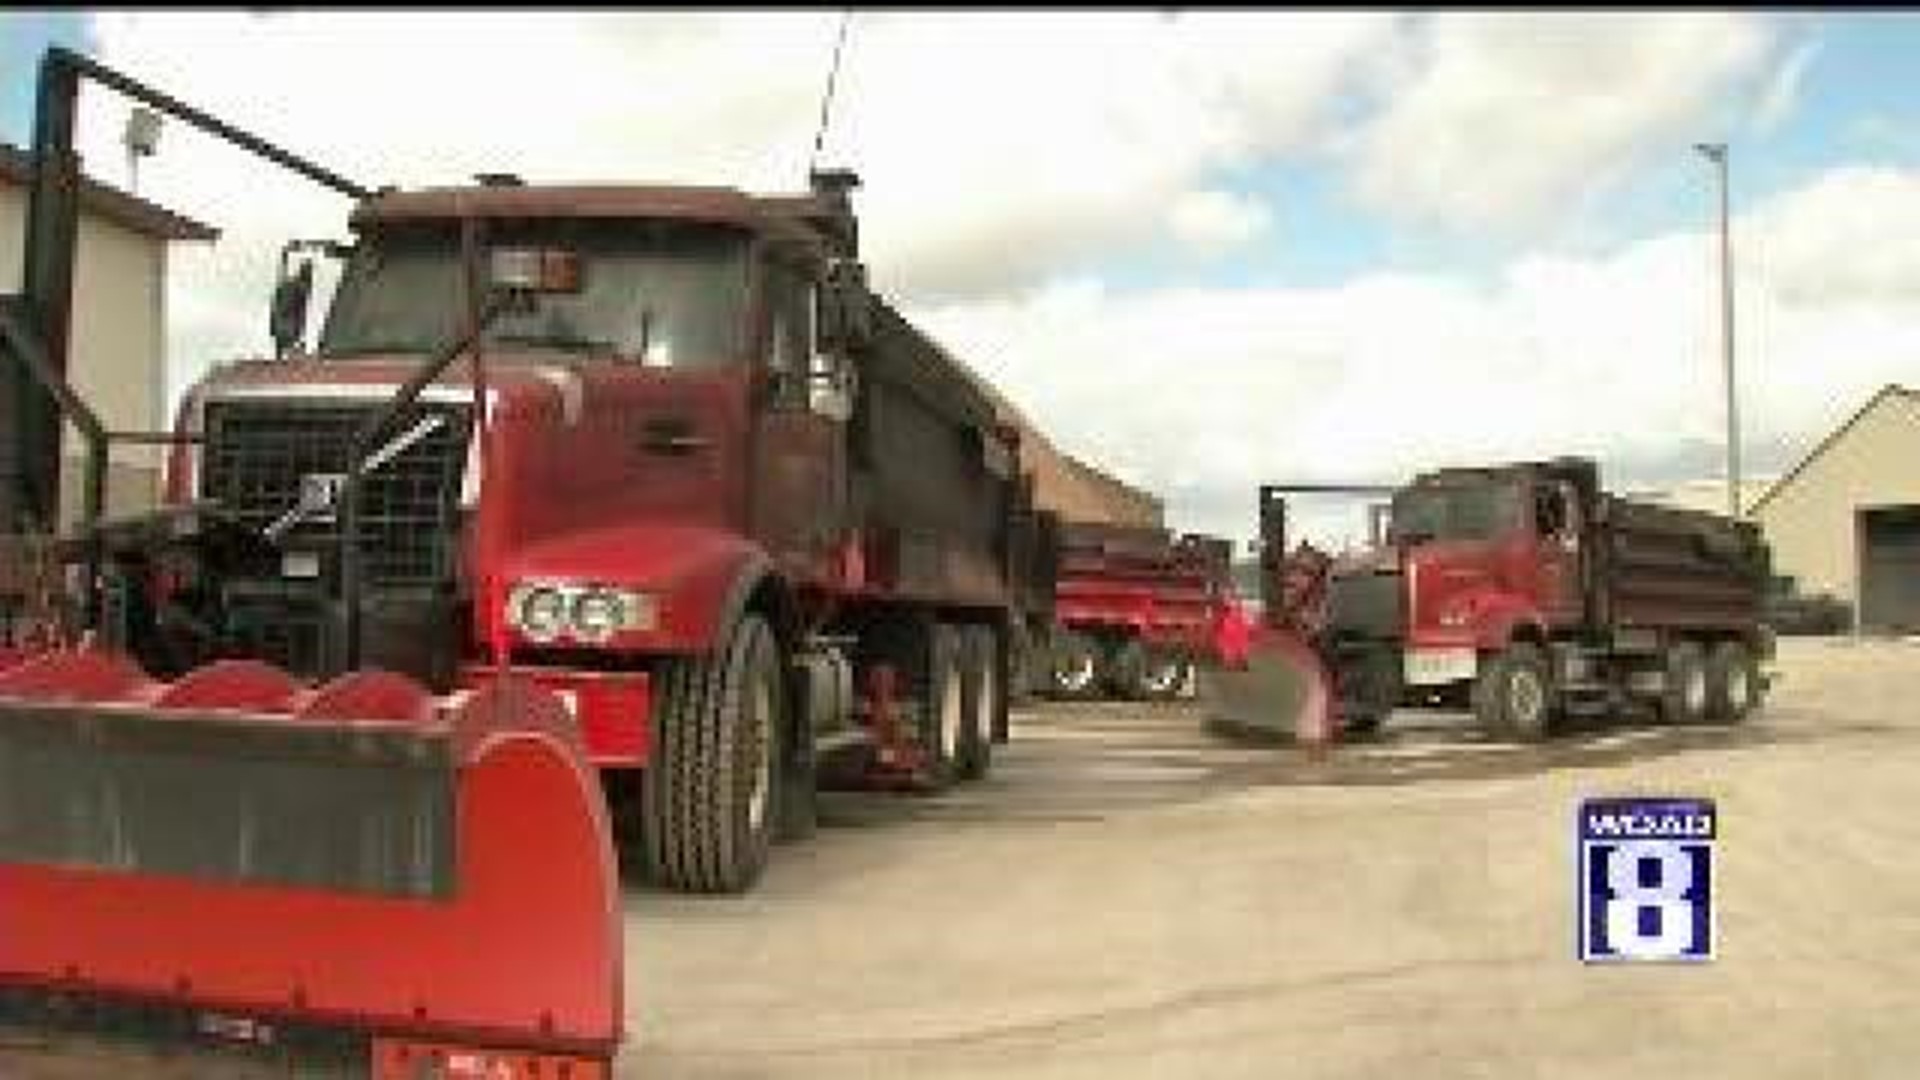 Johnson County Snow Plows Damaged in Fire